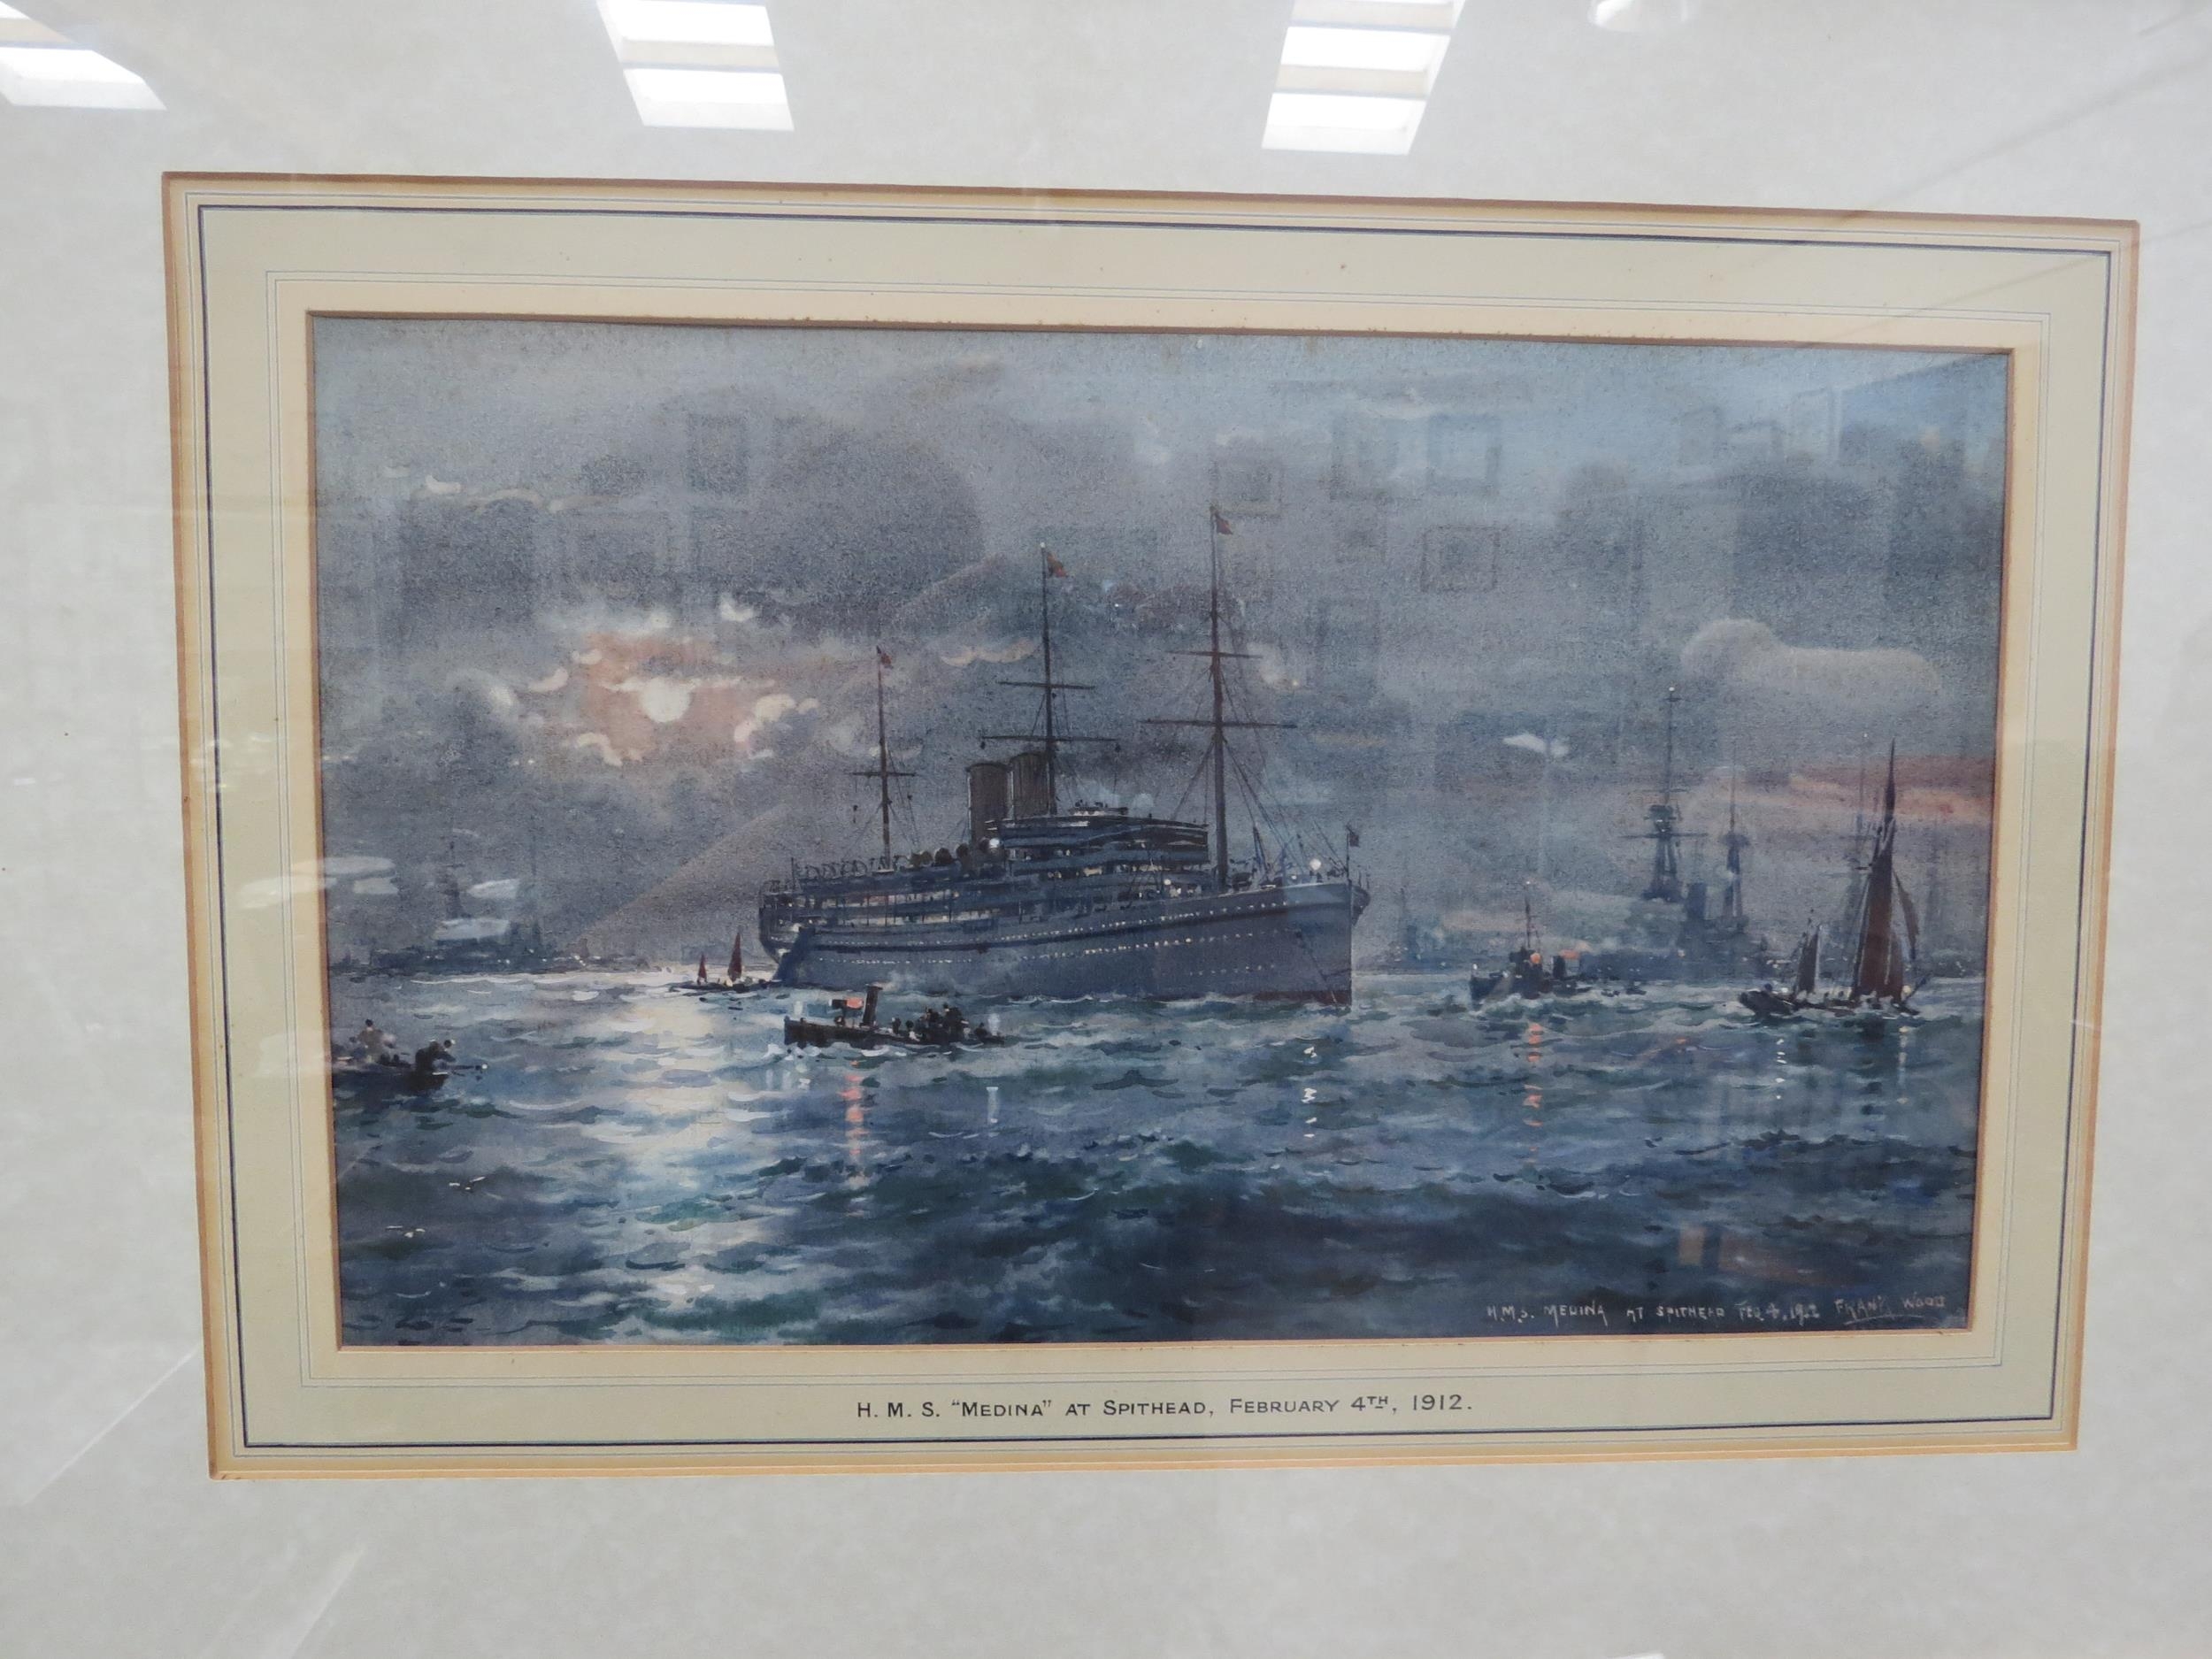 FRANK WATSON WOOD (1852-1953): H.M.S. "Medina" at Spithead February 4th 1912, watercolour, framed - Image 2 of 2